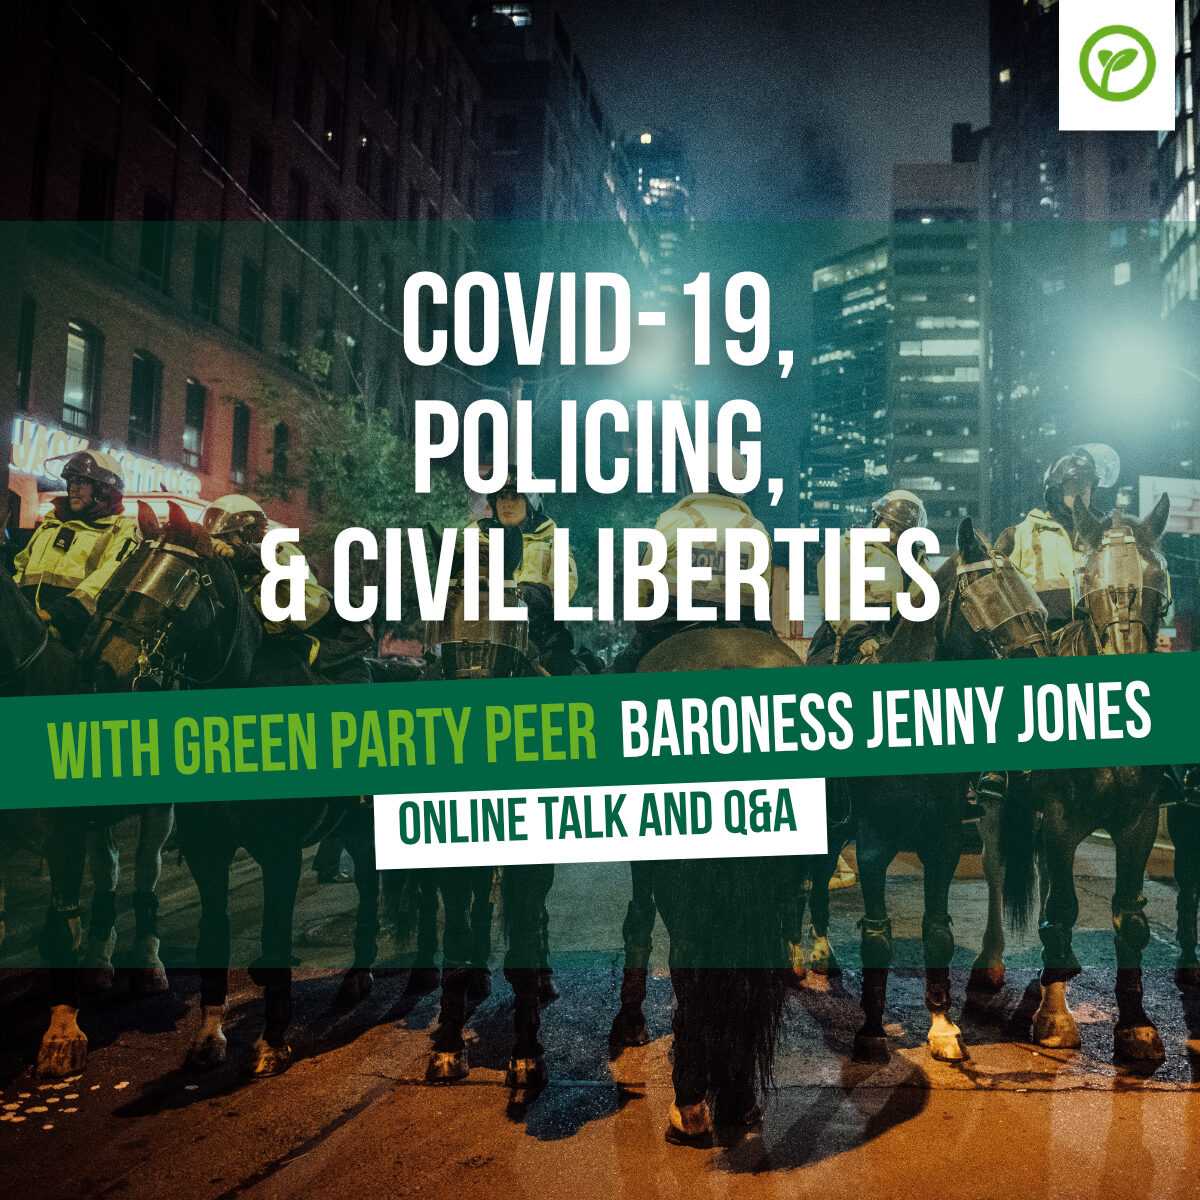 Covid-19, policing, & civil liberities. With Green Party peer Baroness Jenny Jones. Online Talk and Q&A.